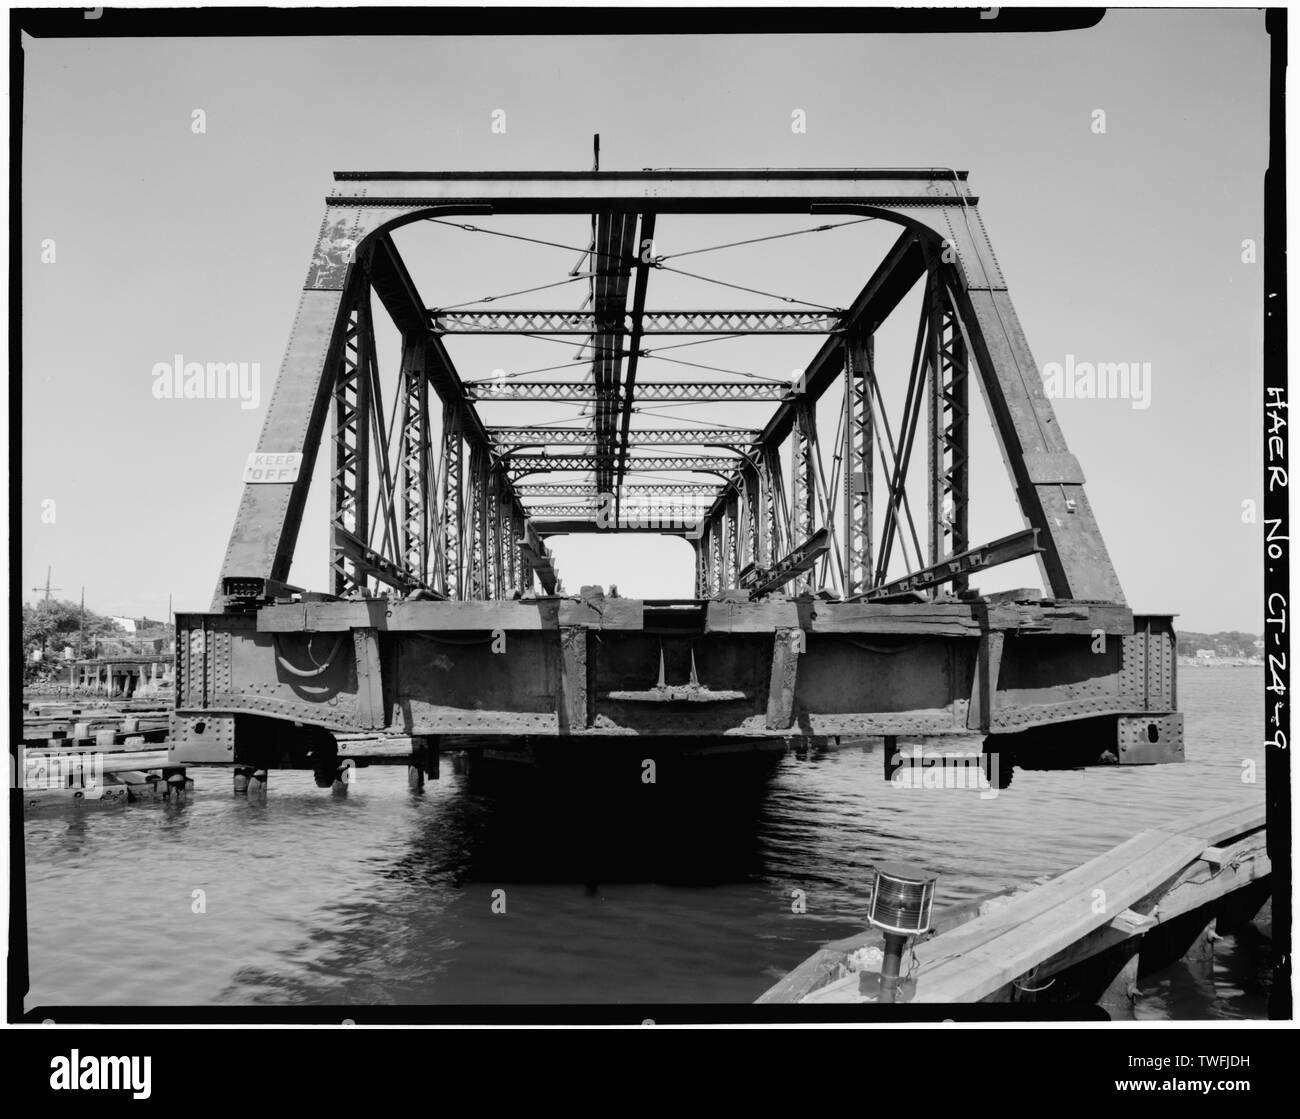 PORTAL ELEVATION DETAIL WITH BRIDGE IN OPEN POSITION - New York, New Haven and Hartford Railroad, Shaw's Cove Bridge, Spanning Shaw's Cove, New London, New London County, CT Stock Photo